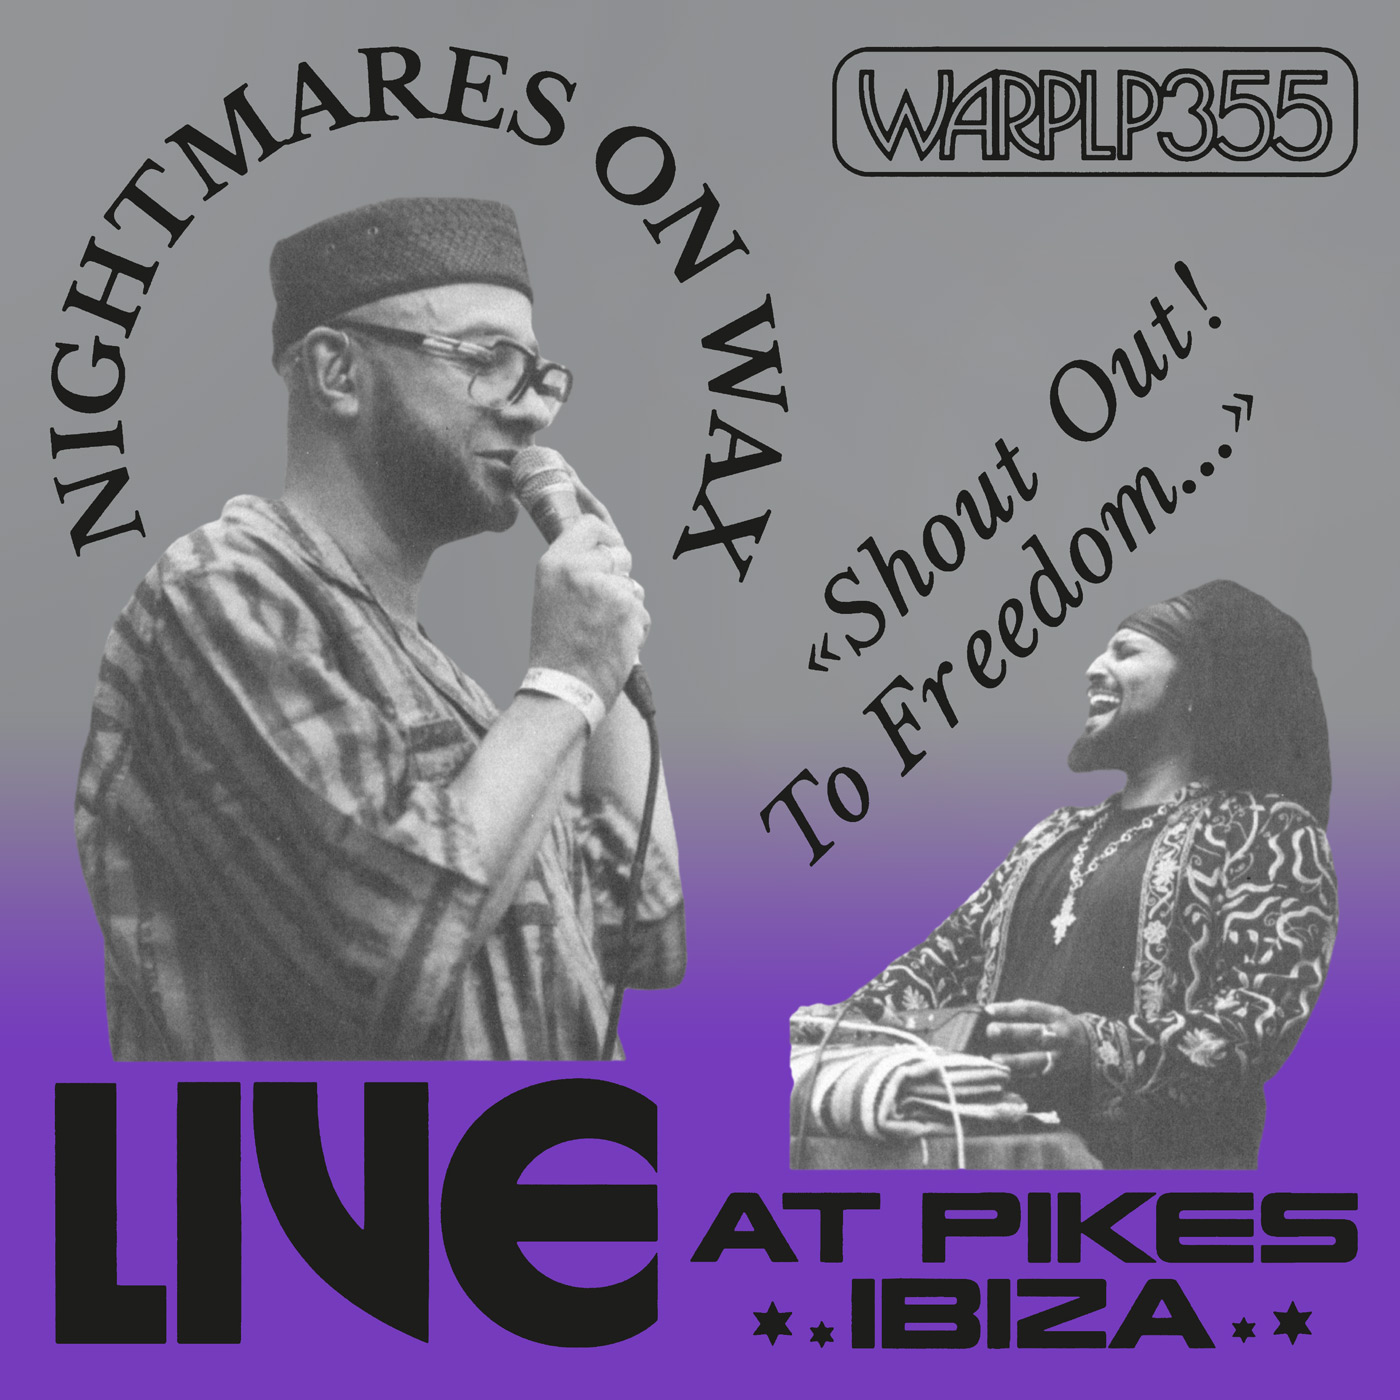 Nightmares on Wax Live at Pikes Ibiza // New album released on Warp Records